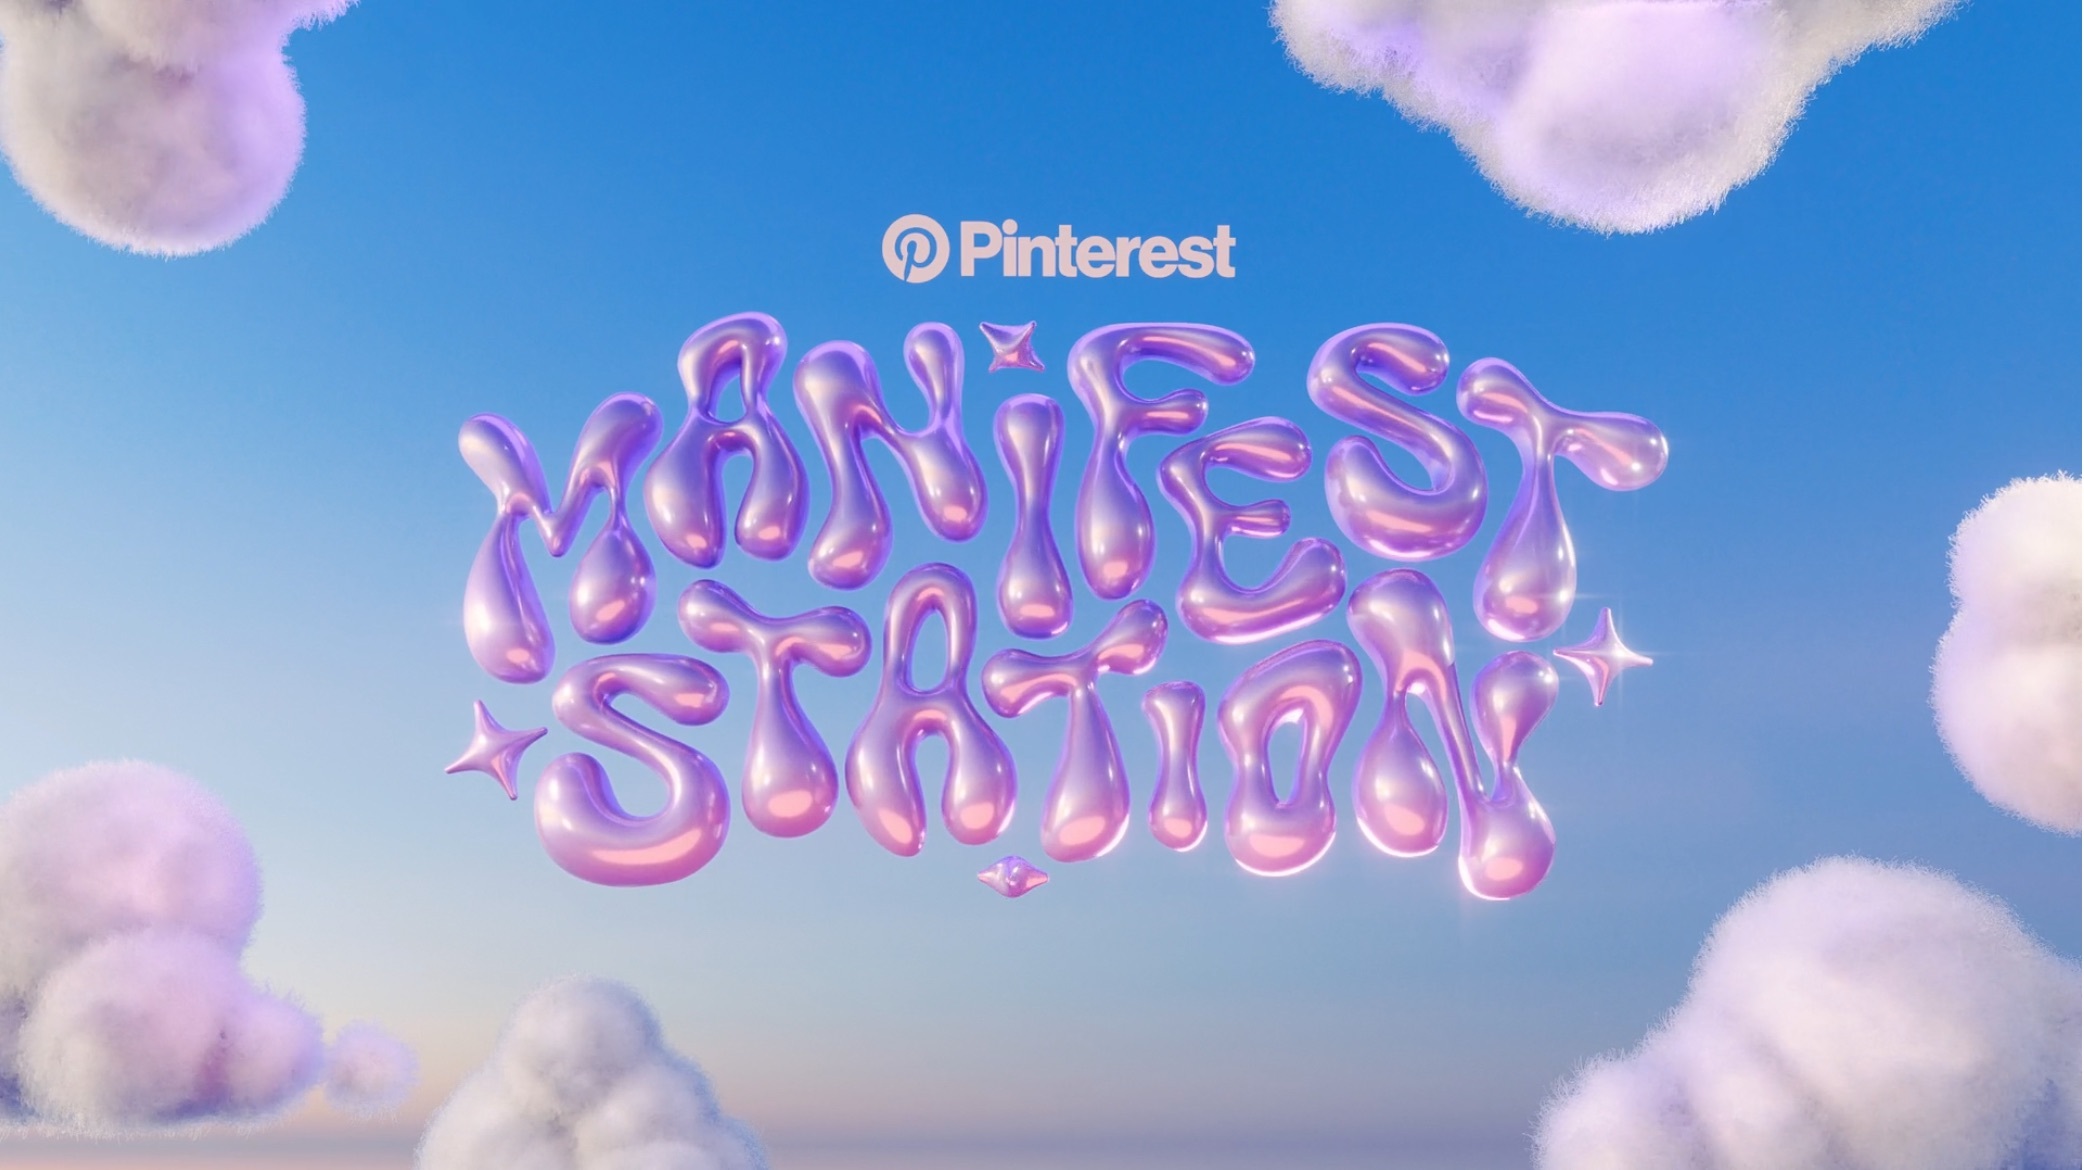 "Pinterest Manifest Station" in collaboration with Coachella